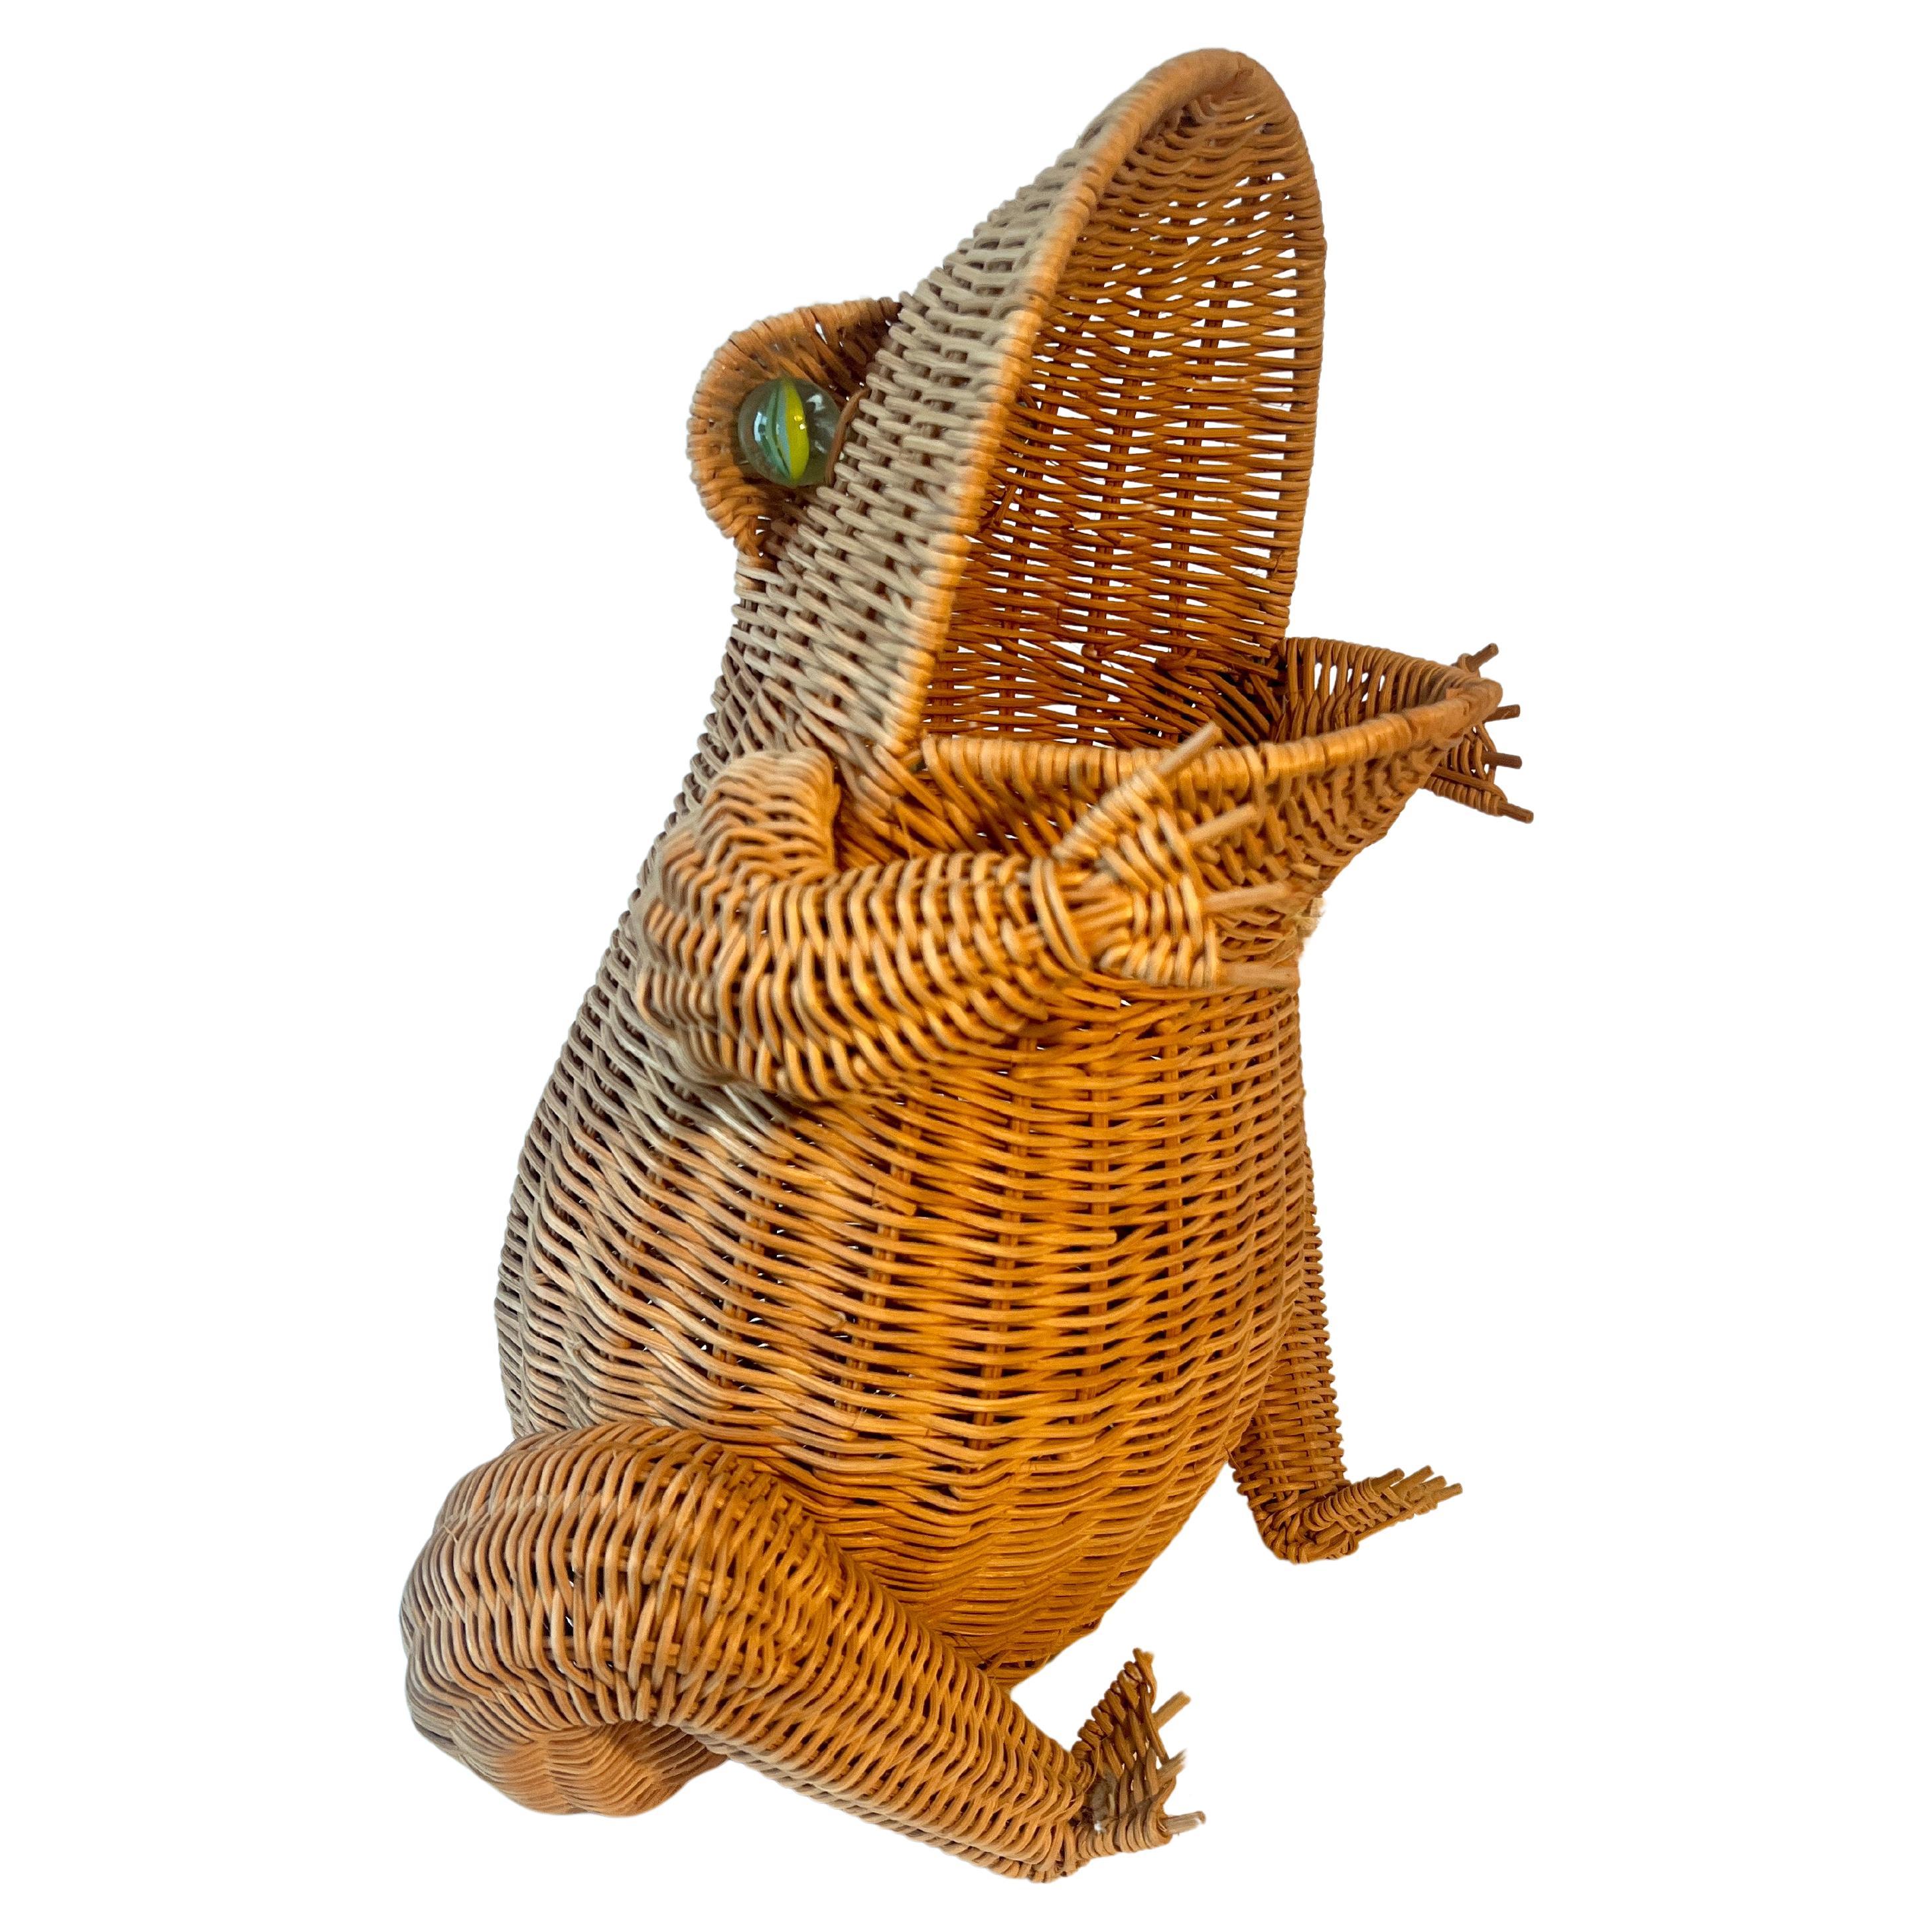 Woven Rattan Frog Basket with Marble Eyes After Mario Lopez Torres